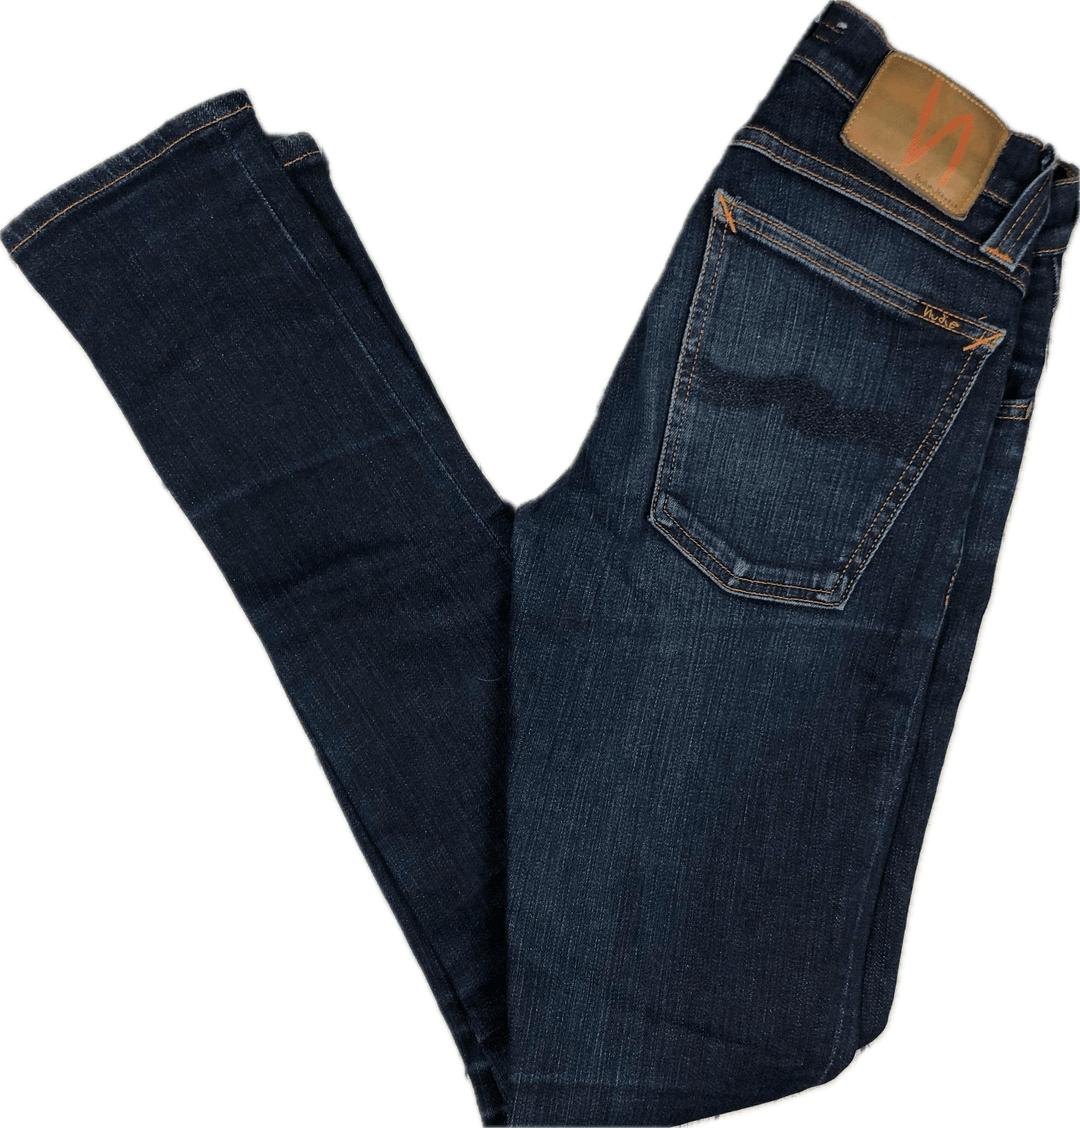 Nudie Jeans Co 'Tight Long John' Dry Comfort Wash Jeans - Size 25/32 - Jean Pool